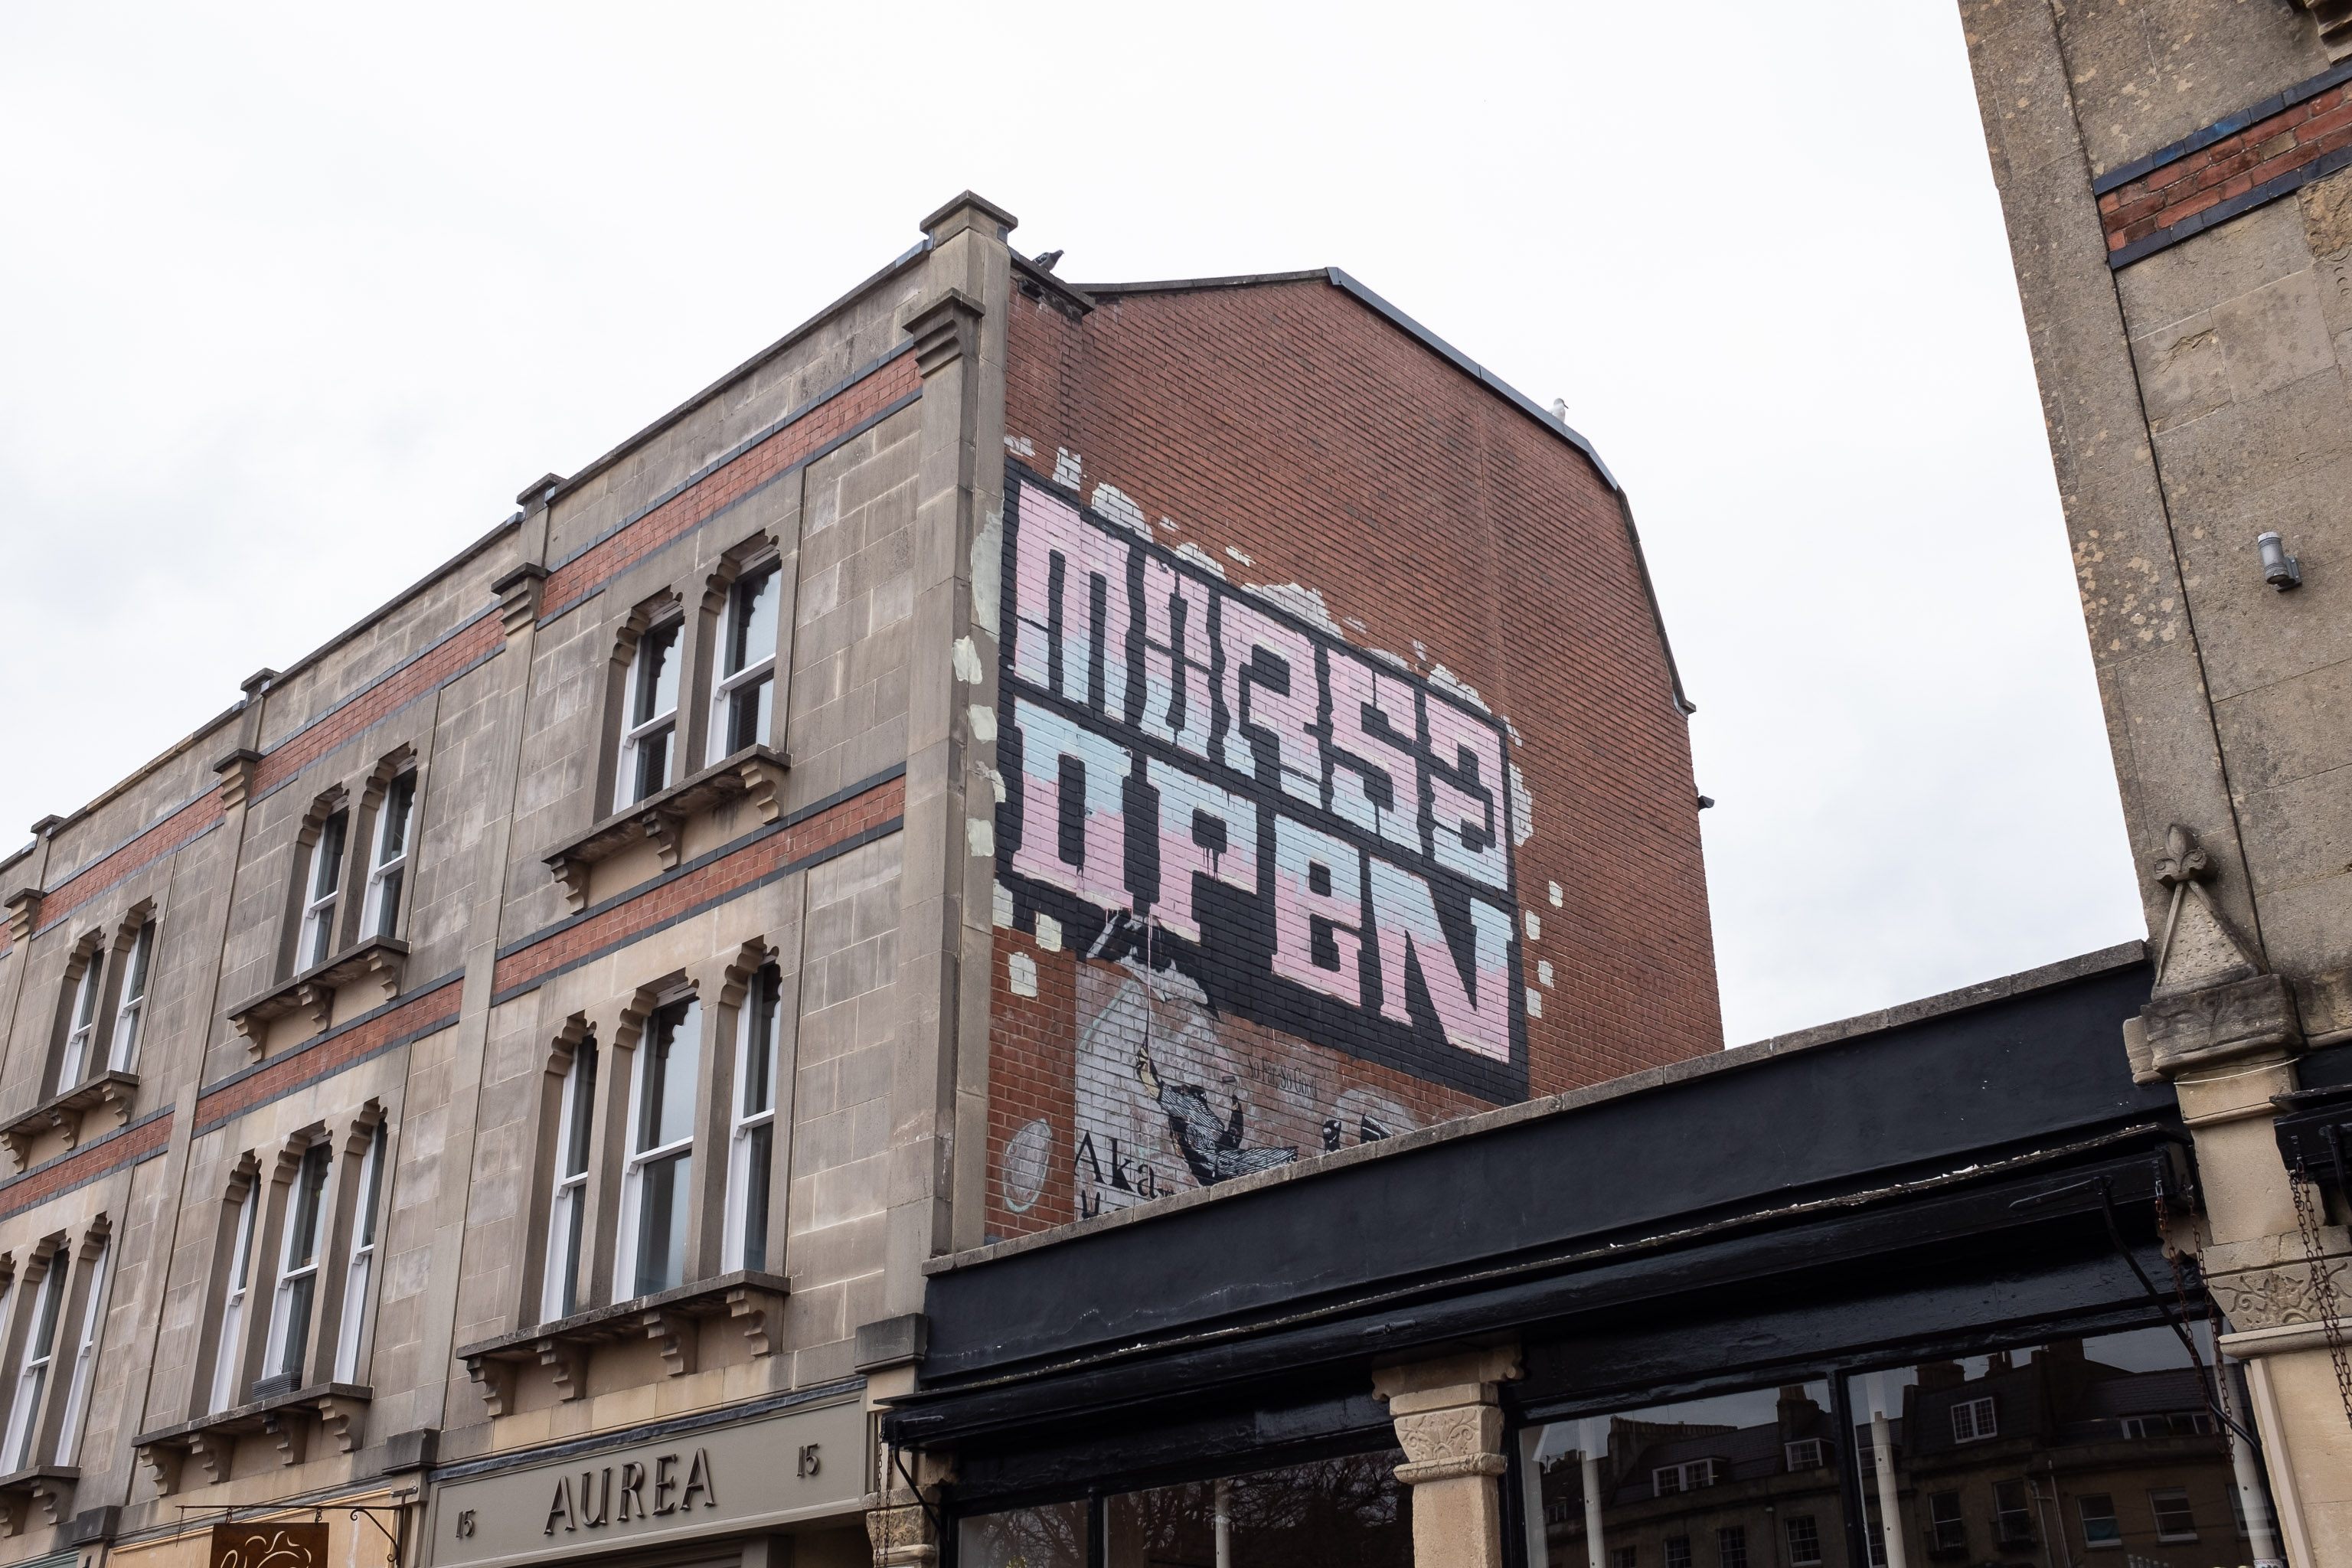 MORSA
I'm glad I added a search feature to the site recently, as it let me find this earlier photo when the name rang a vague bell. Morsa clearly gets ab...